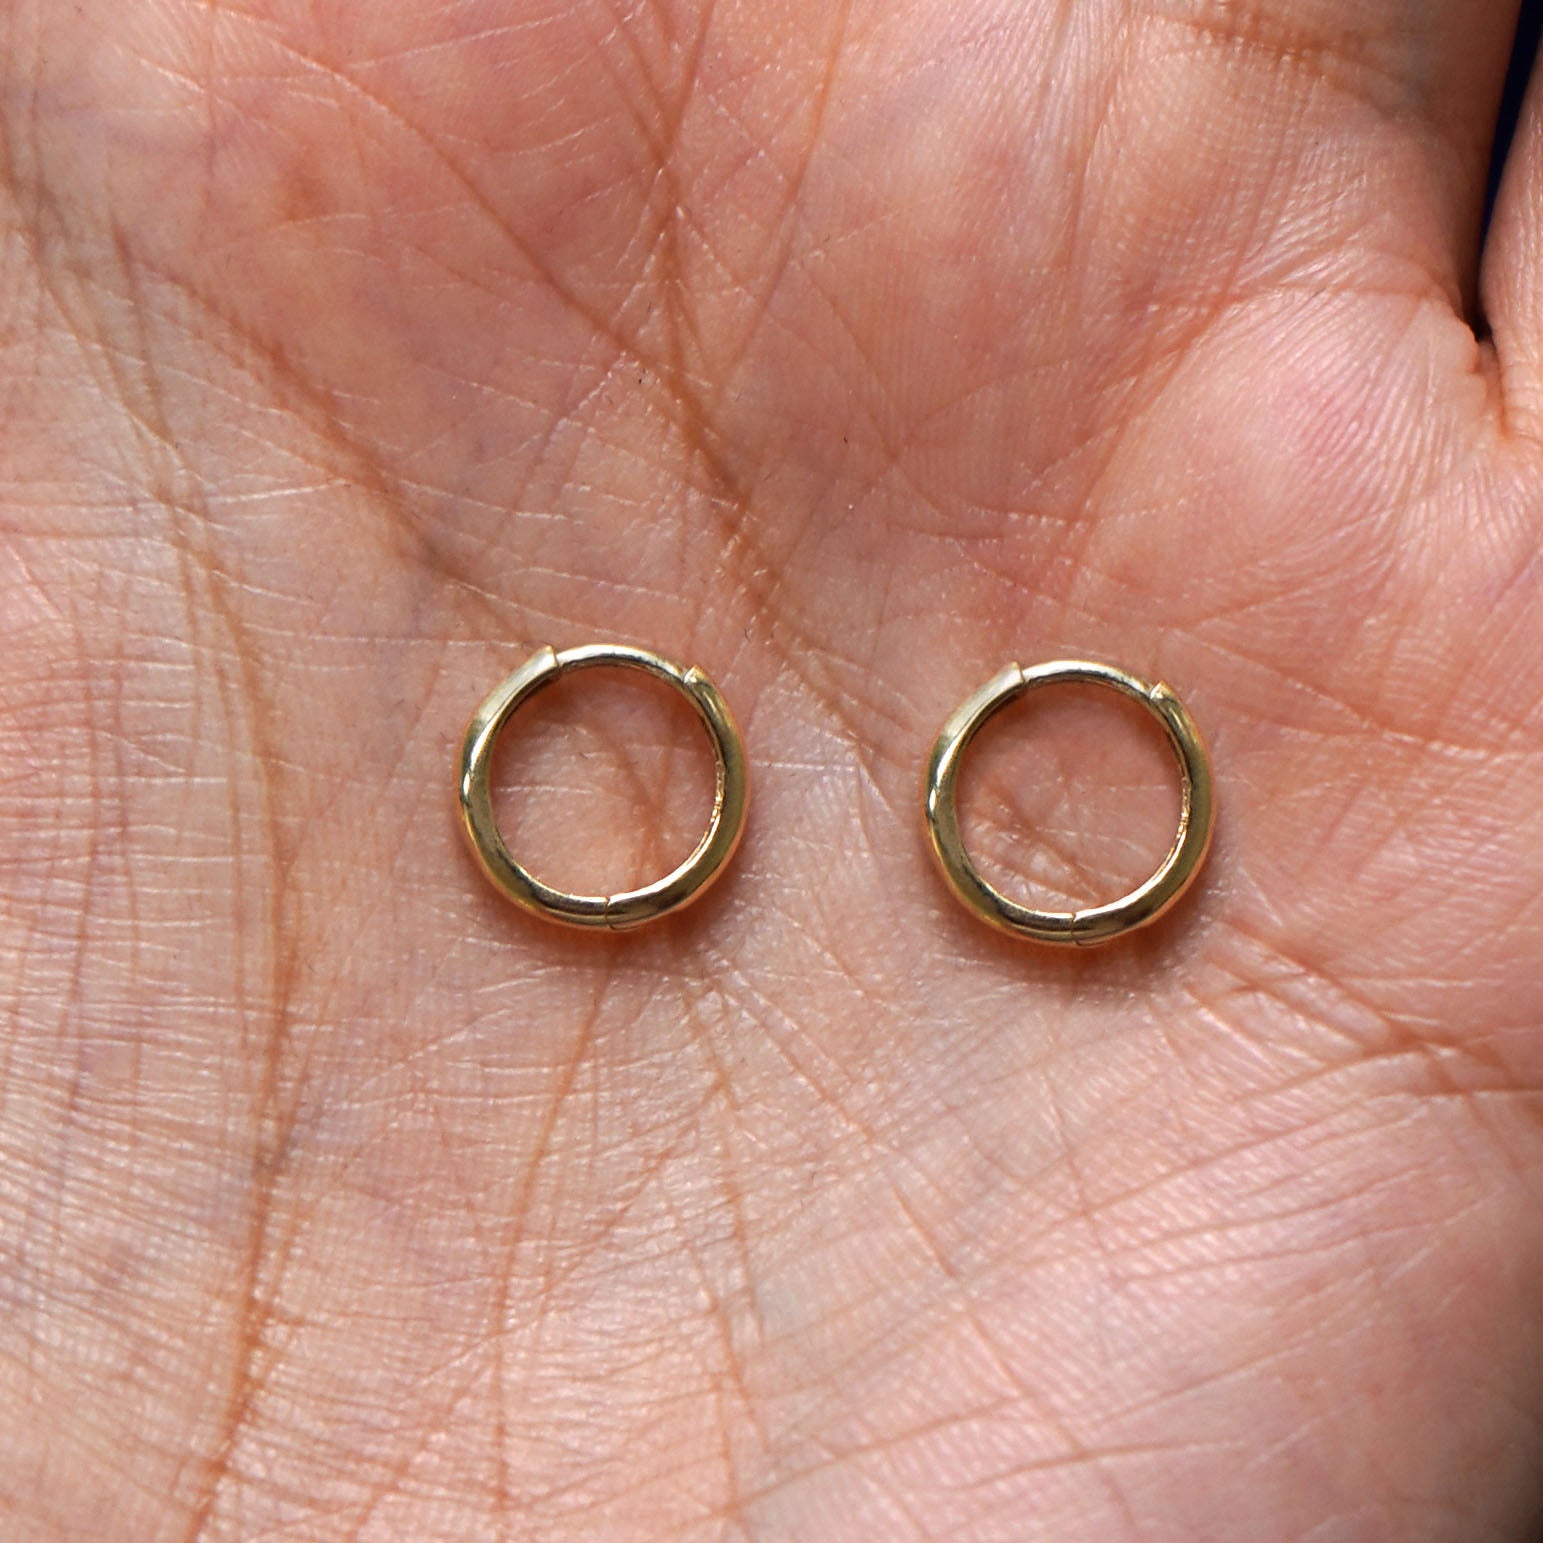 A pair of 14k gold Small Curvy Huggie Hoop Earring sitting in a model's palm